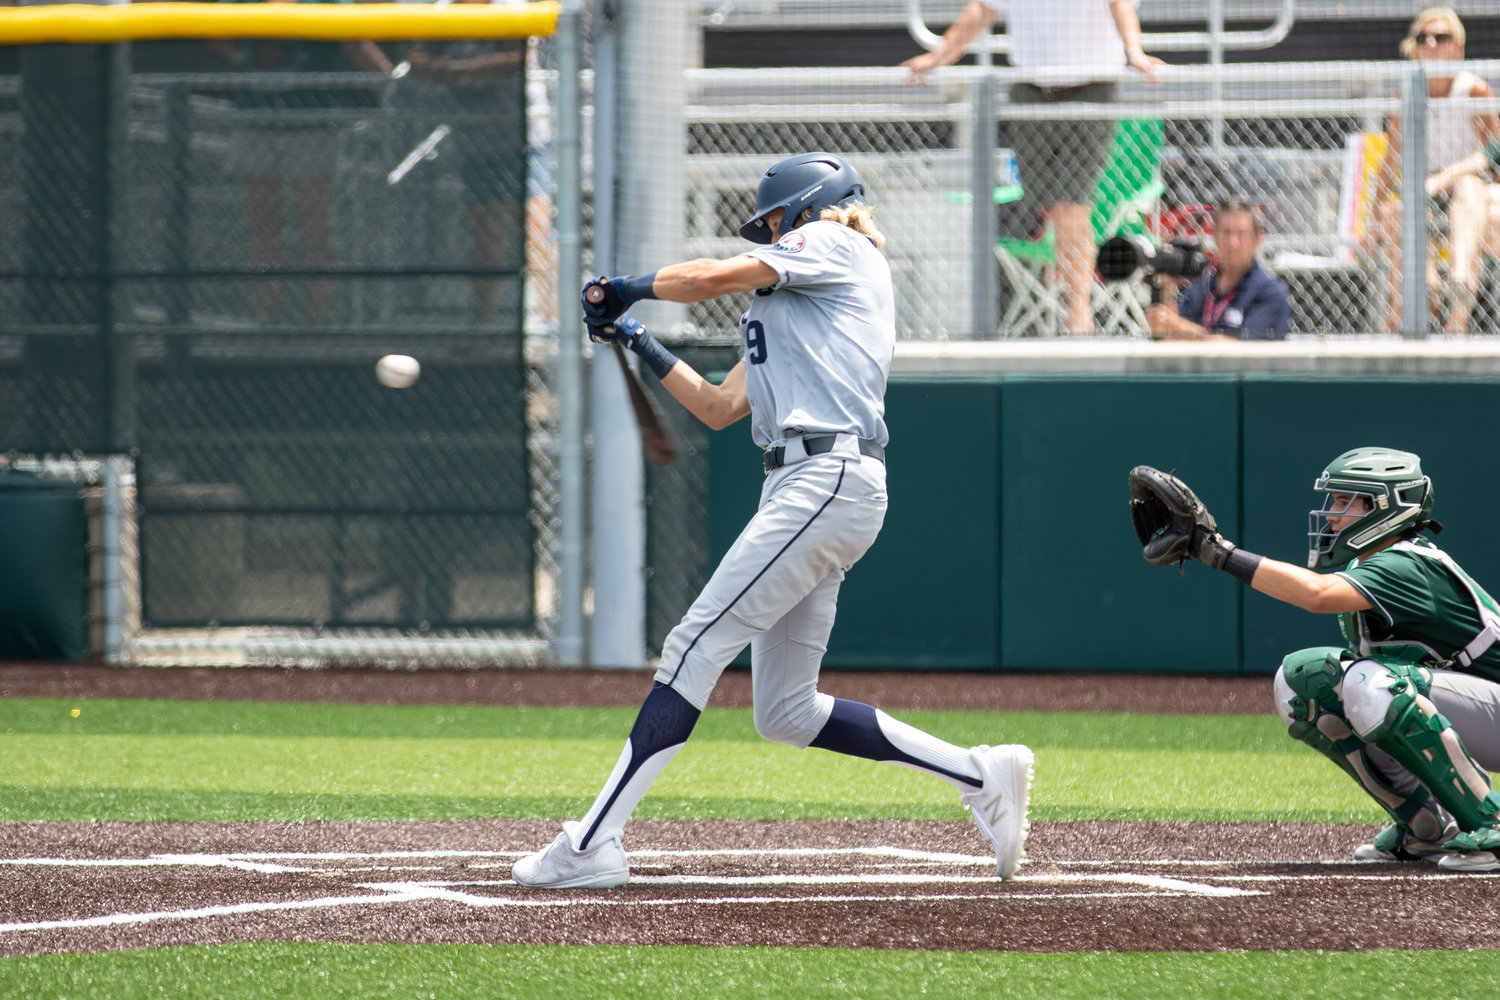 Tompkins sophomore Drew Markle takes a swing during Game 3 of the Falcons’ Region III-6A semifinals against Strake Jesuit on Saturday, May 29, at Cy-Falls High.